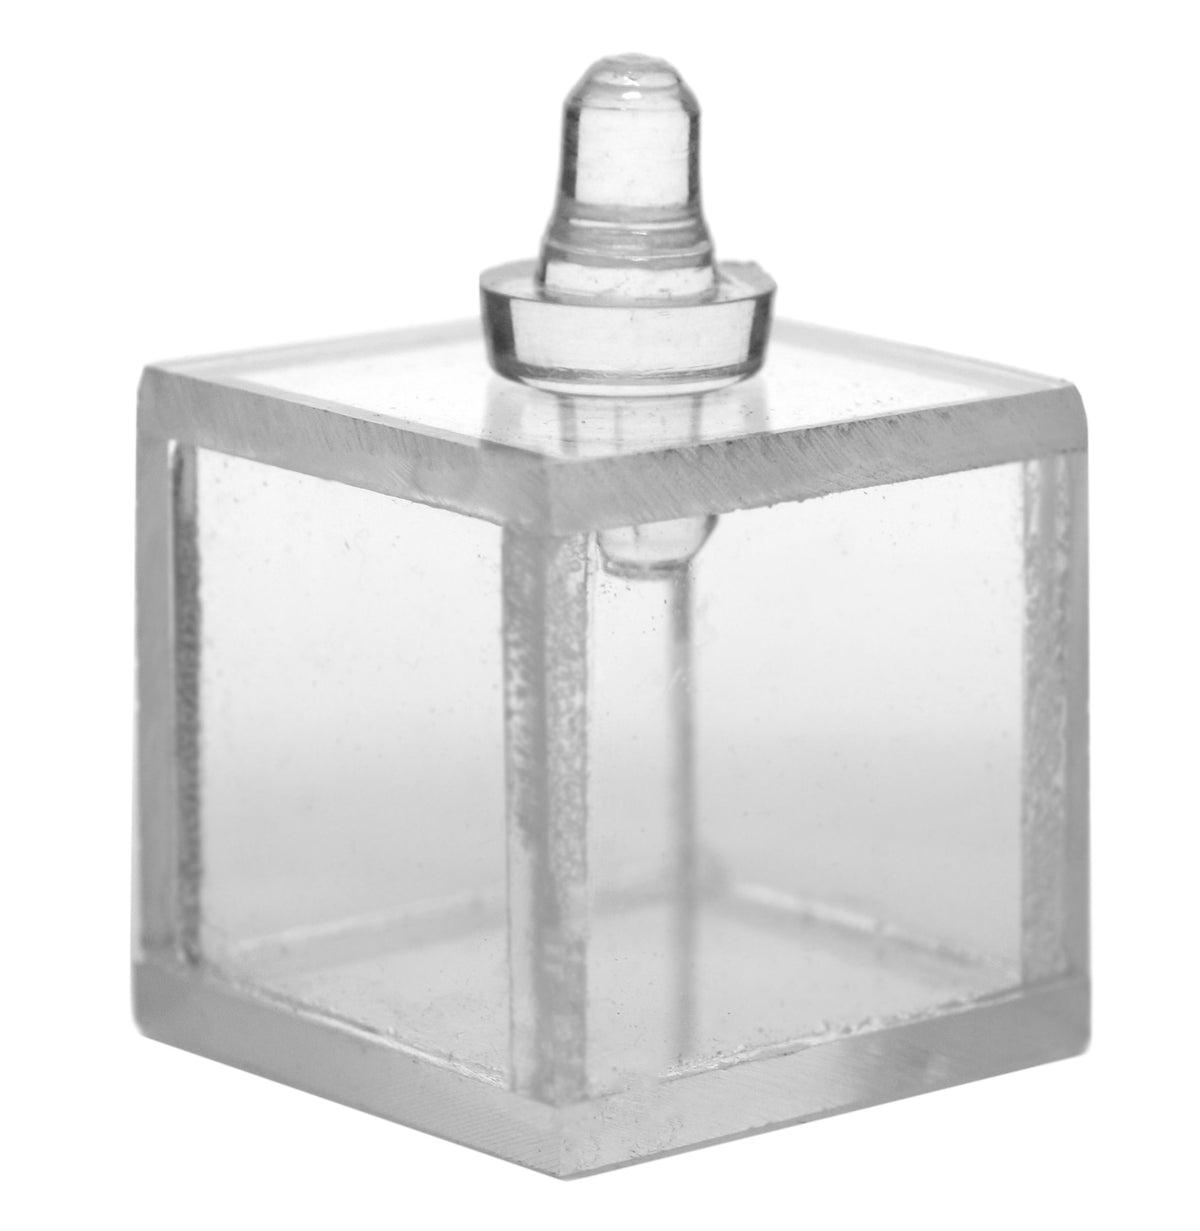 Product Hollow Acrylic Prism, Cube - 1"x1" - With Stopper - For Physics and Li — Eisco Labs image